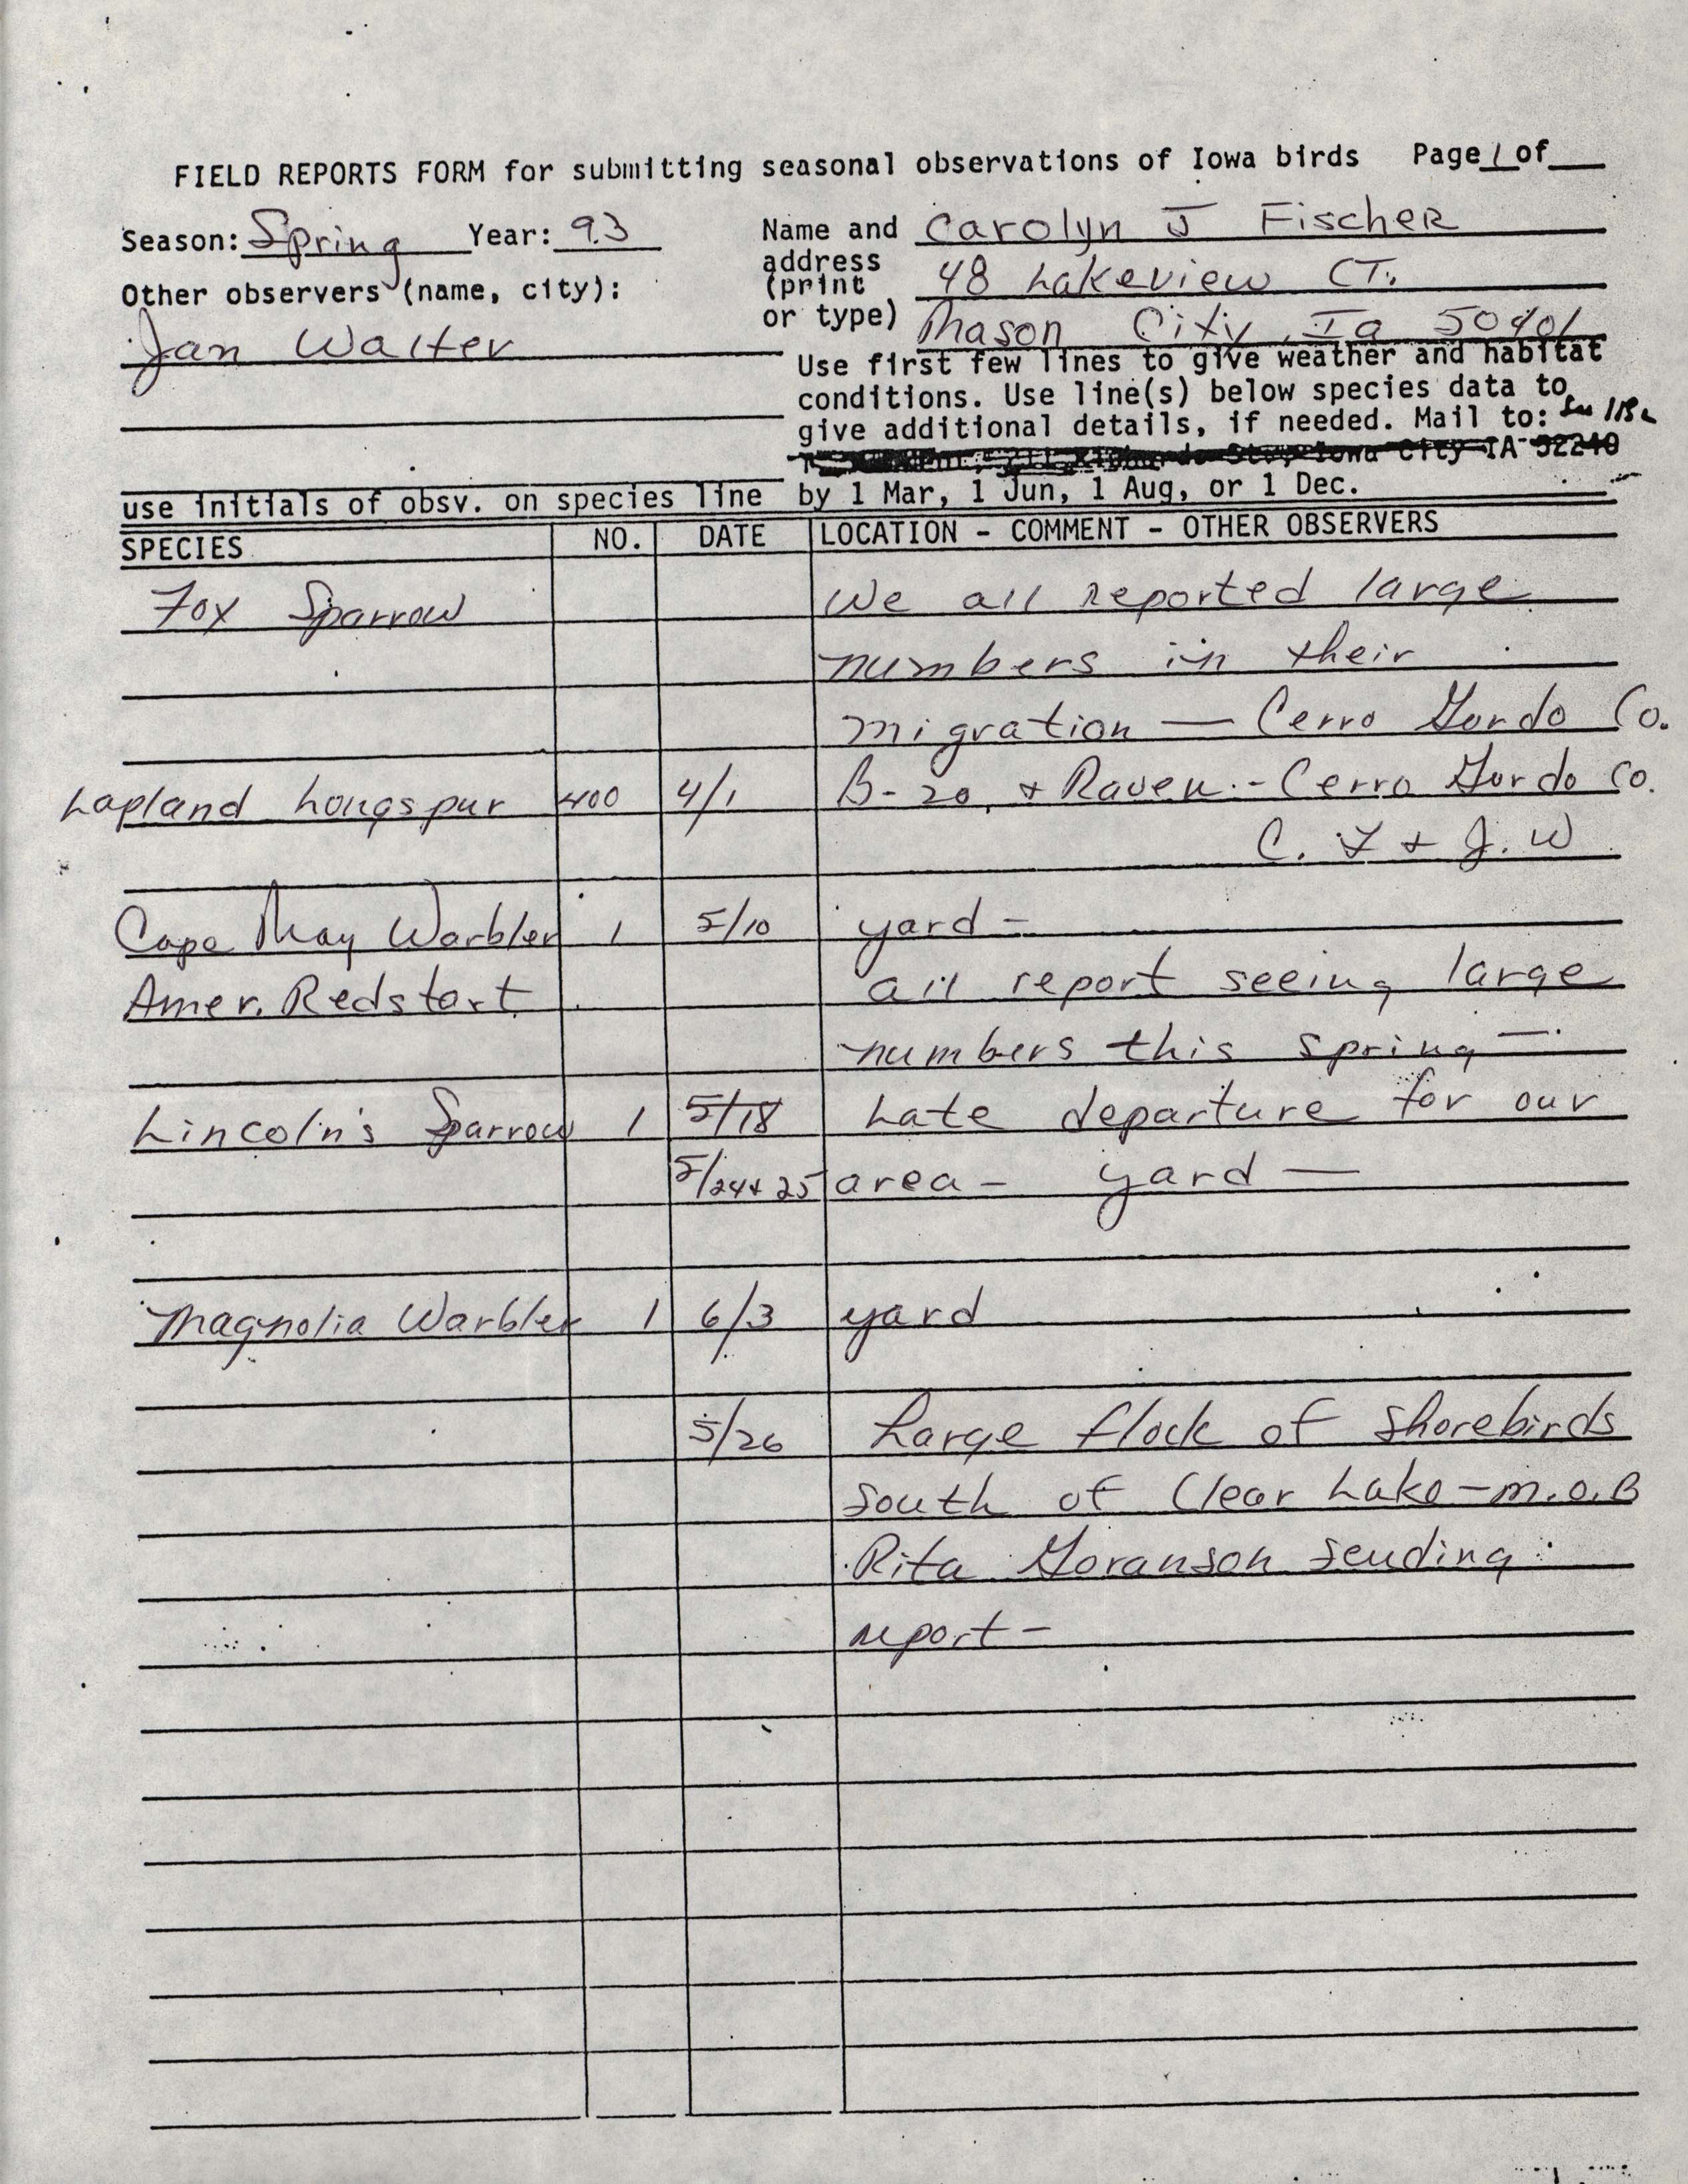 Field reports form for submitting seasonal observations of Iowa birds, Carolyn Fischer, Spring 1993